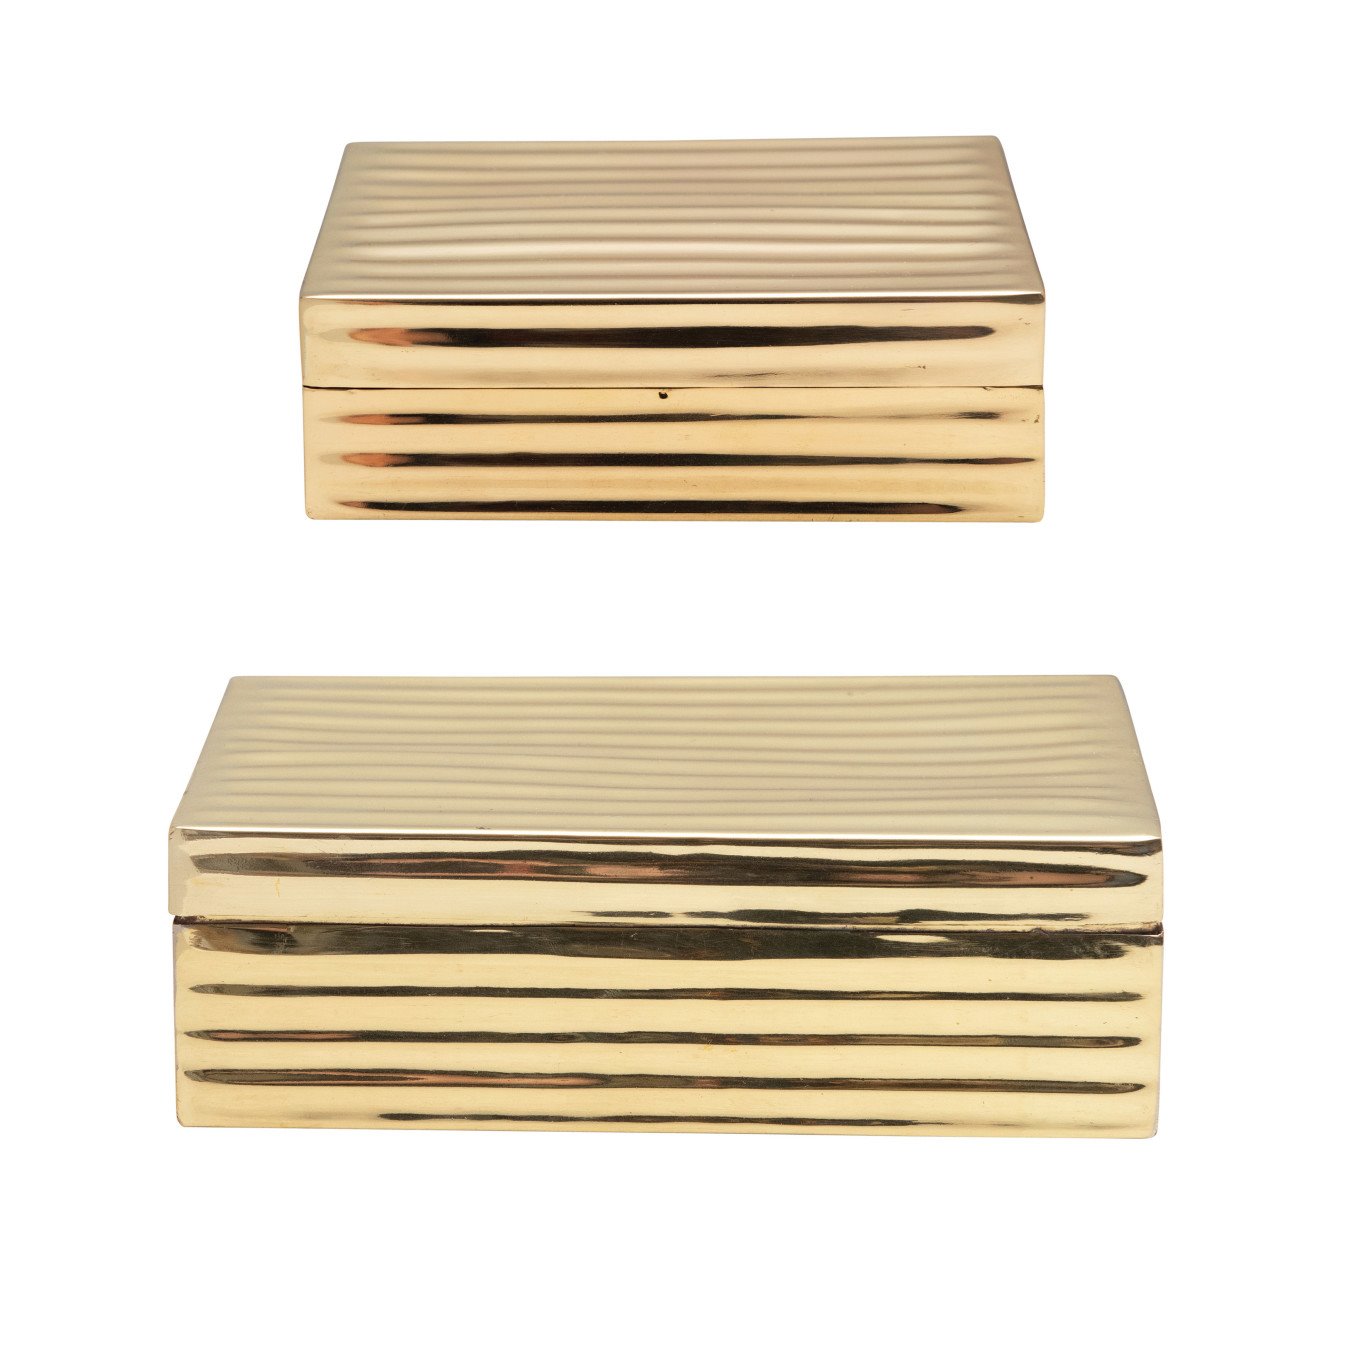 Embossed Stainless Steel Boxes, Brass Finish, Set of 2